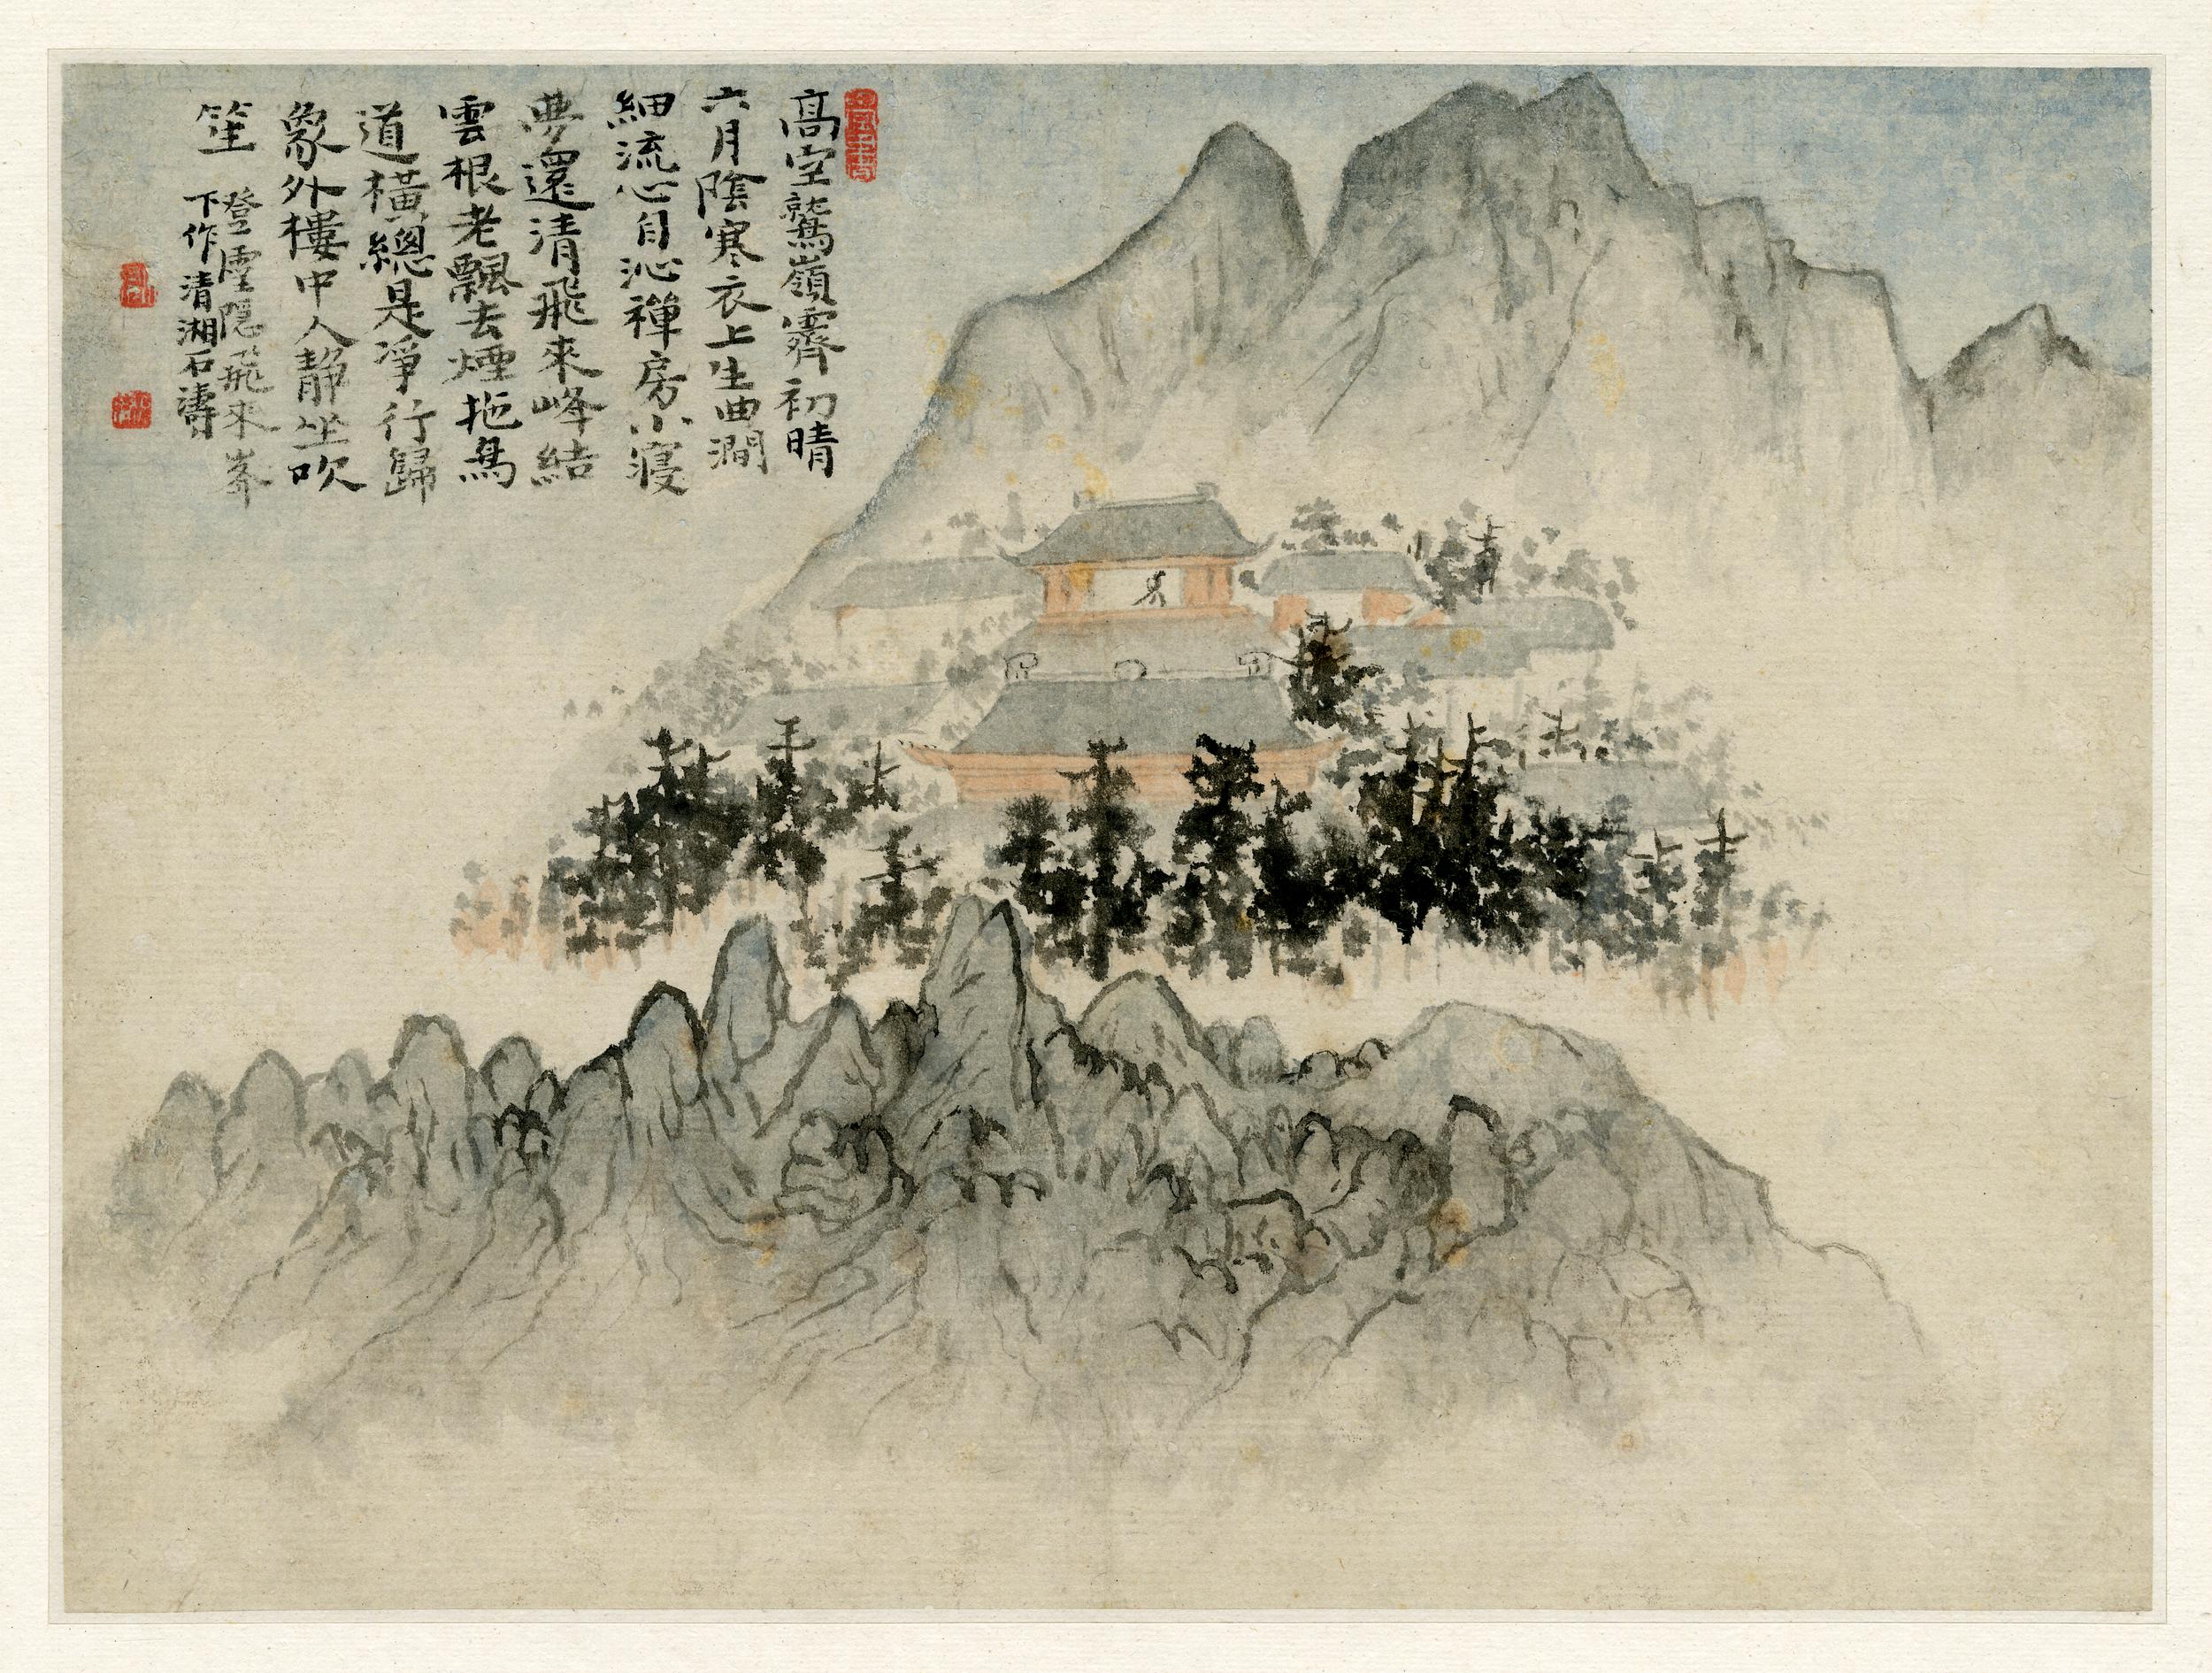 Shitao, Landscape, c.1698–1700, album leaf, ink and colour on paper, 20.8 cm high, China (© Trustees of the British Museum)